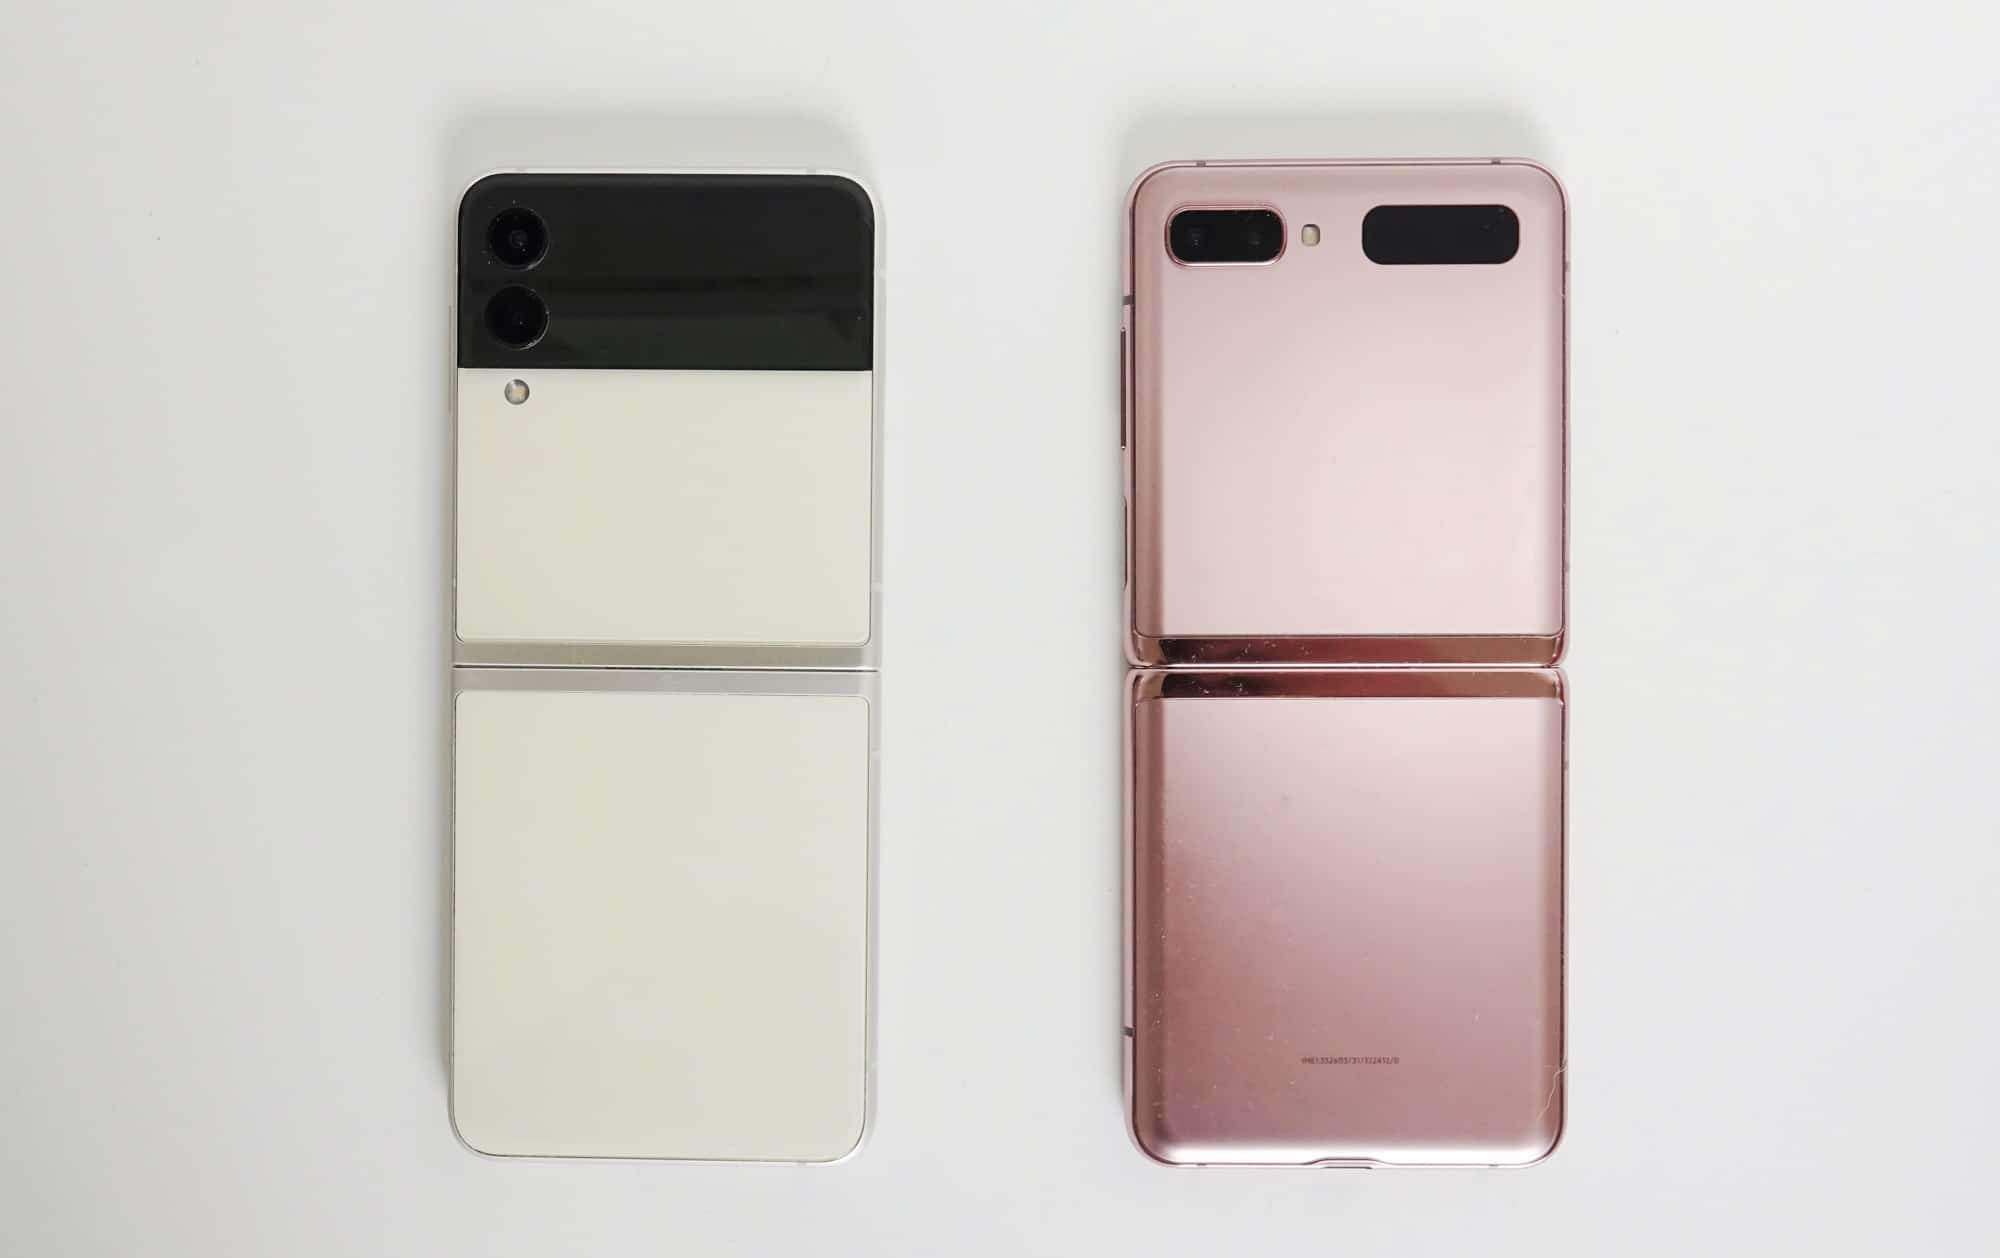 Design changes on the Flip 3 (left) and Flip 5G (right).